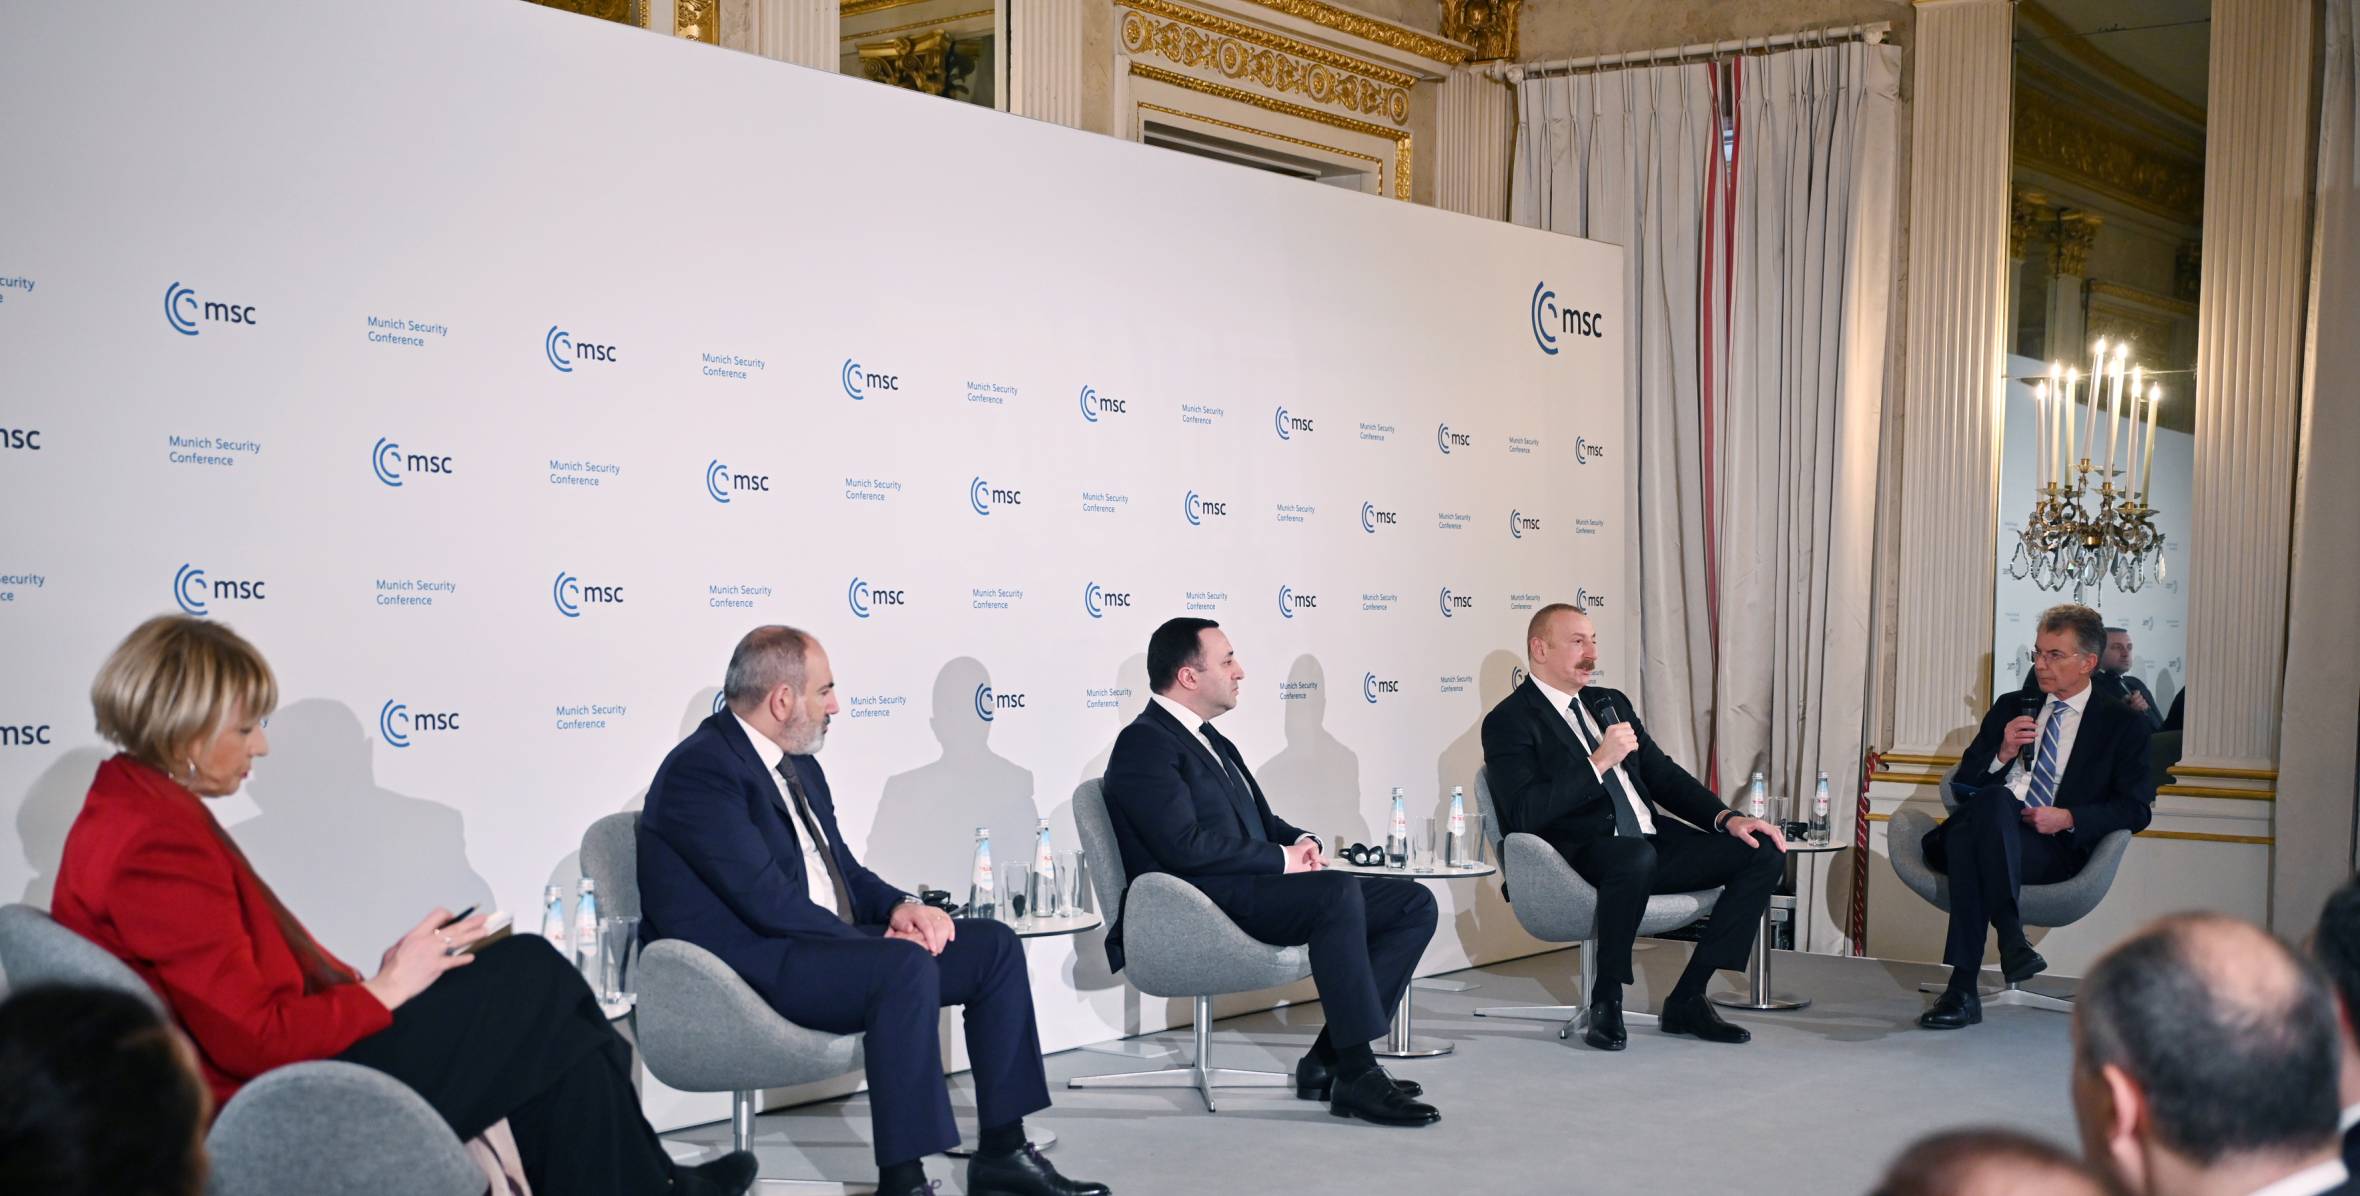 Ilham Aliyev attended plenary session on “Moving Mountains? Building Security in the South Caucasus” in Munich